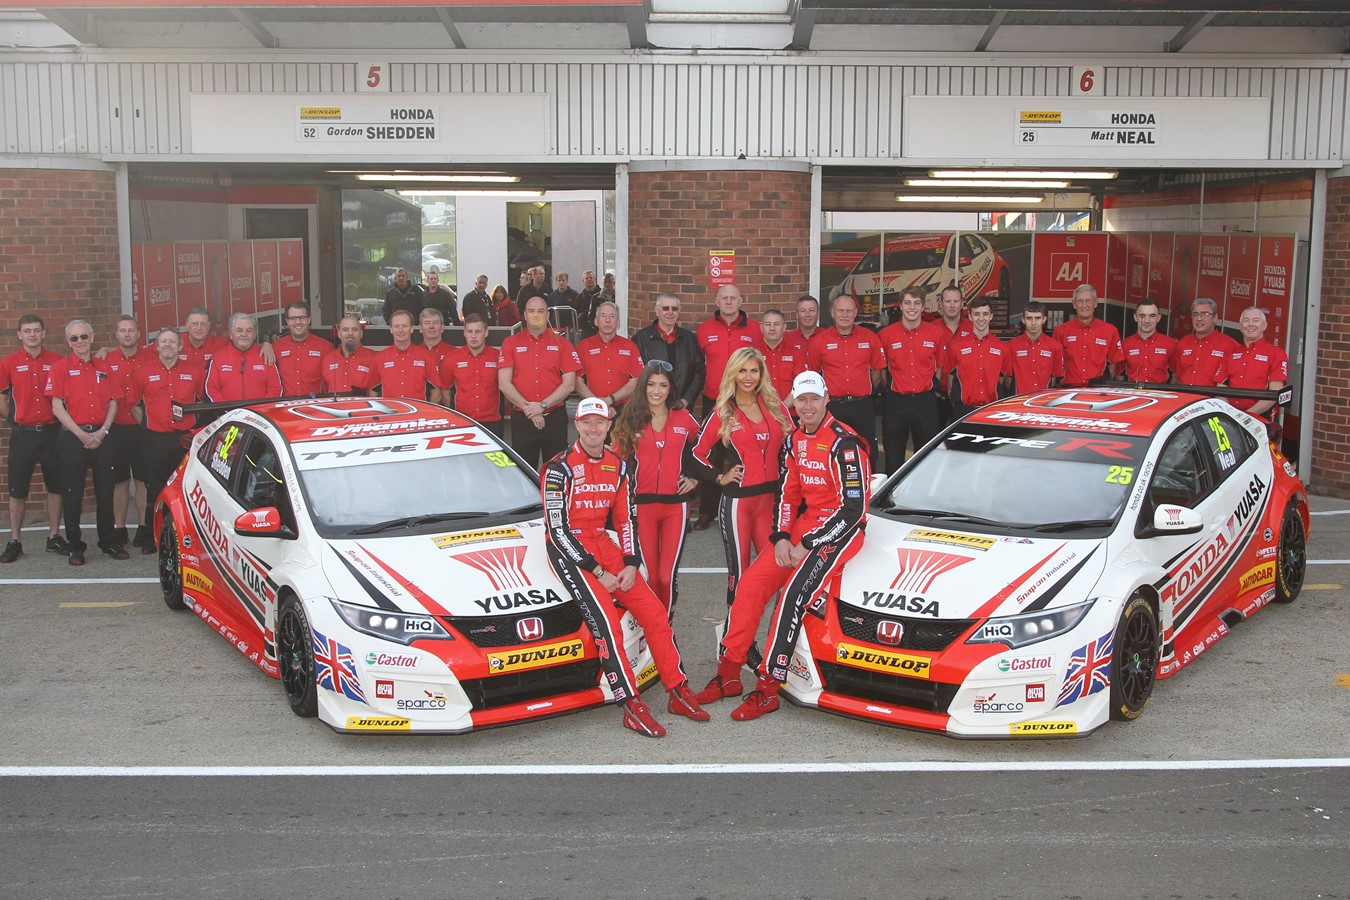 British Touring Car Team Honda Yuasa Racing secures first motorsport title for new Civic Type R